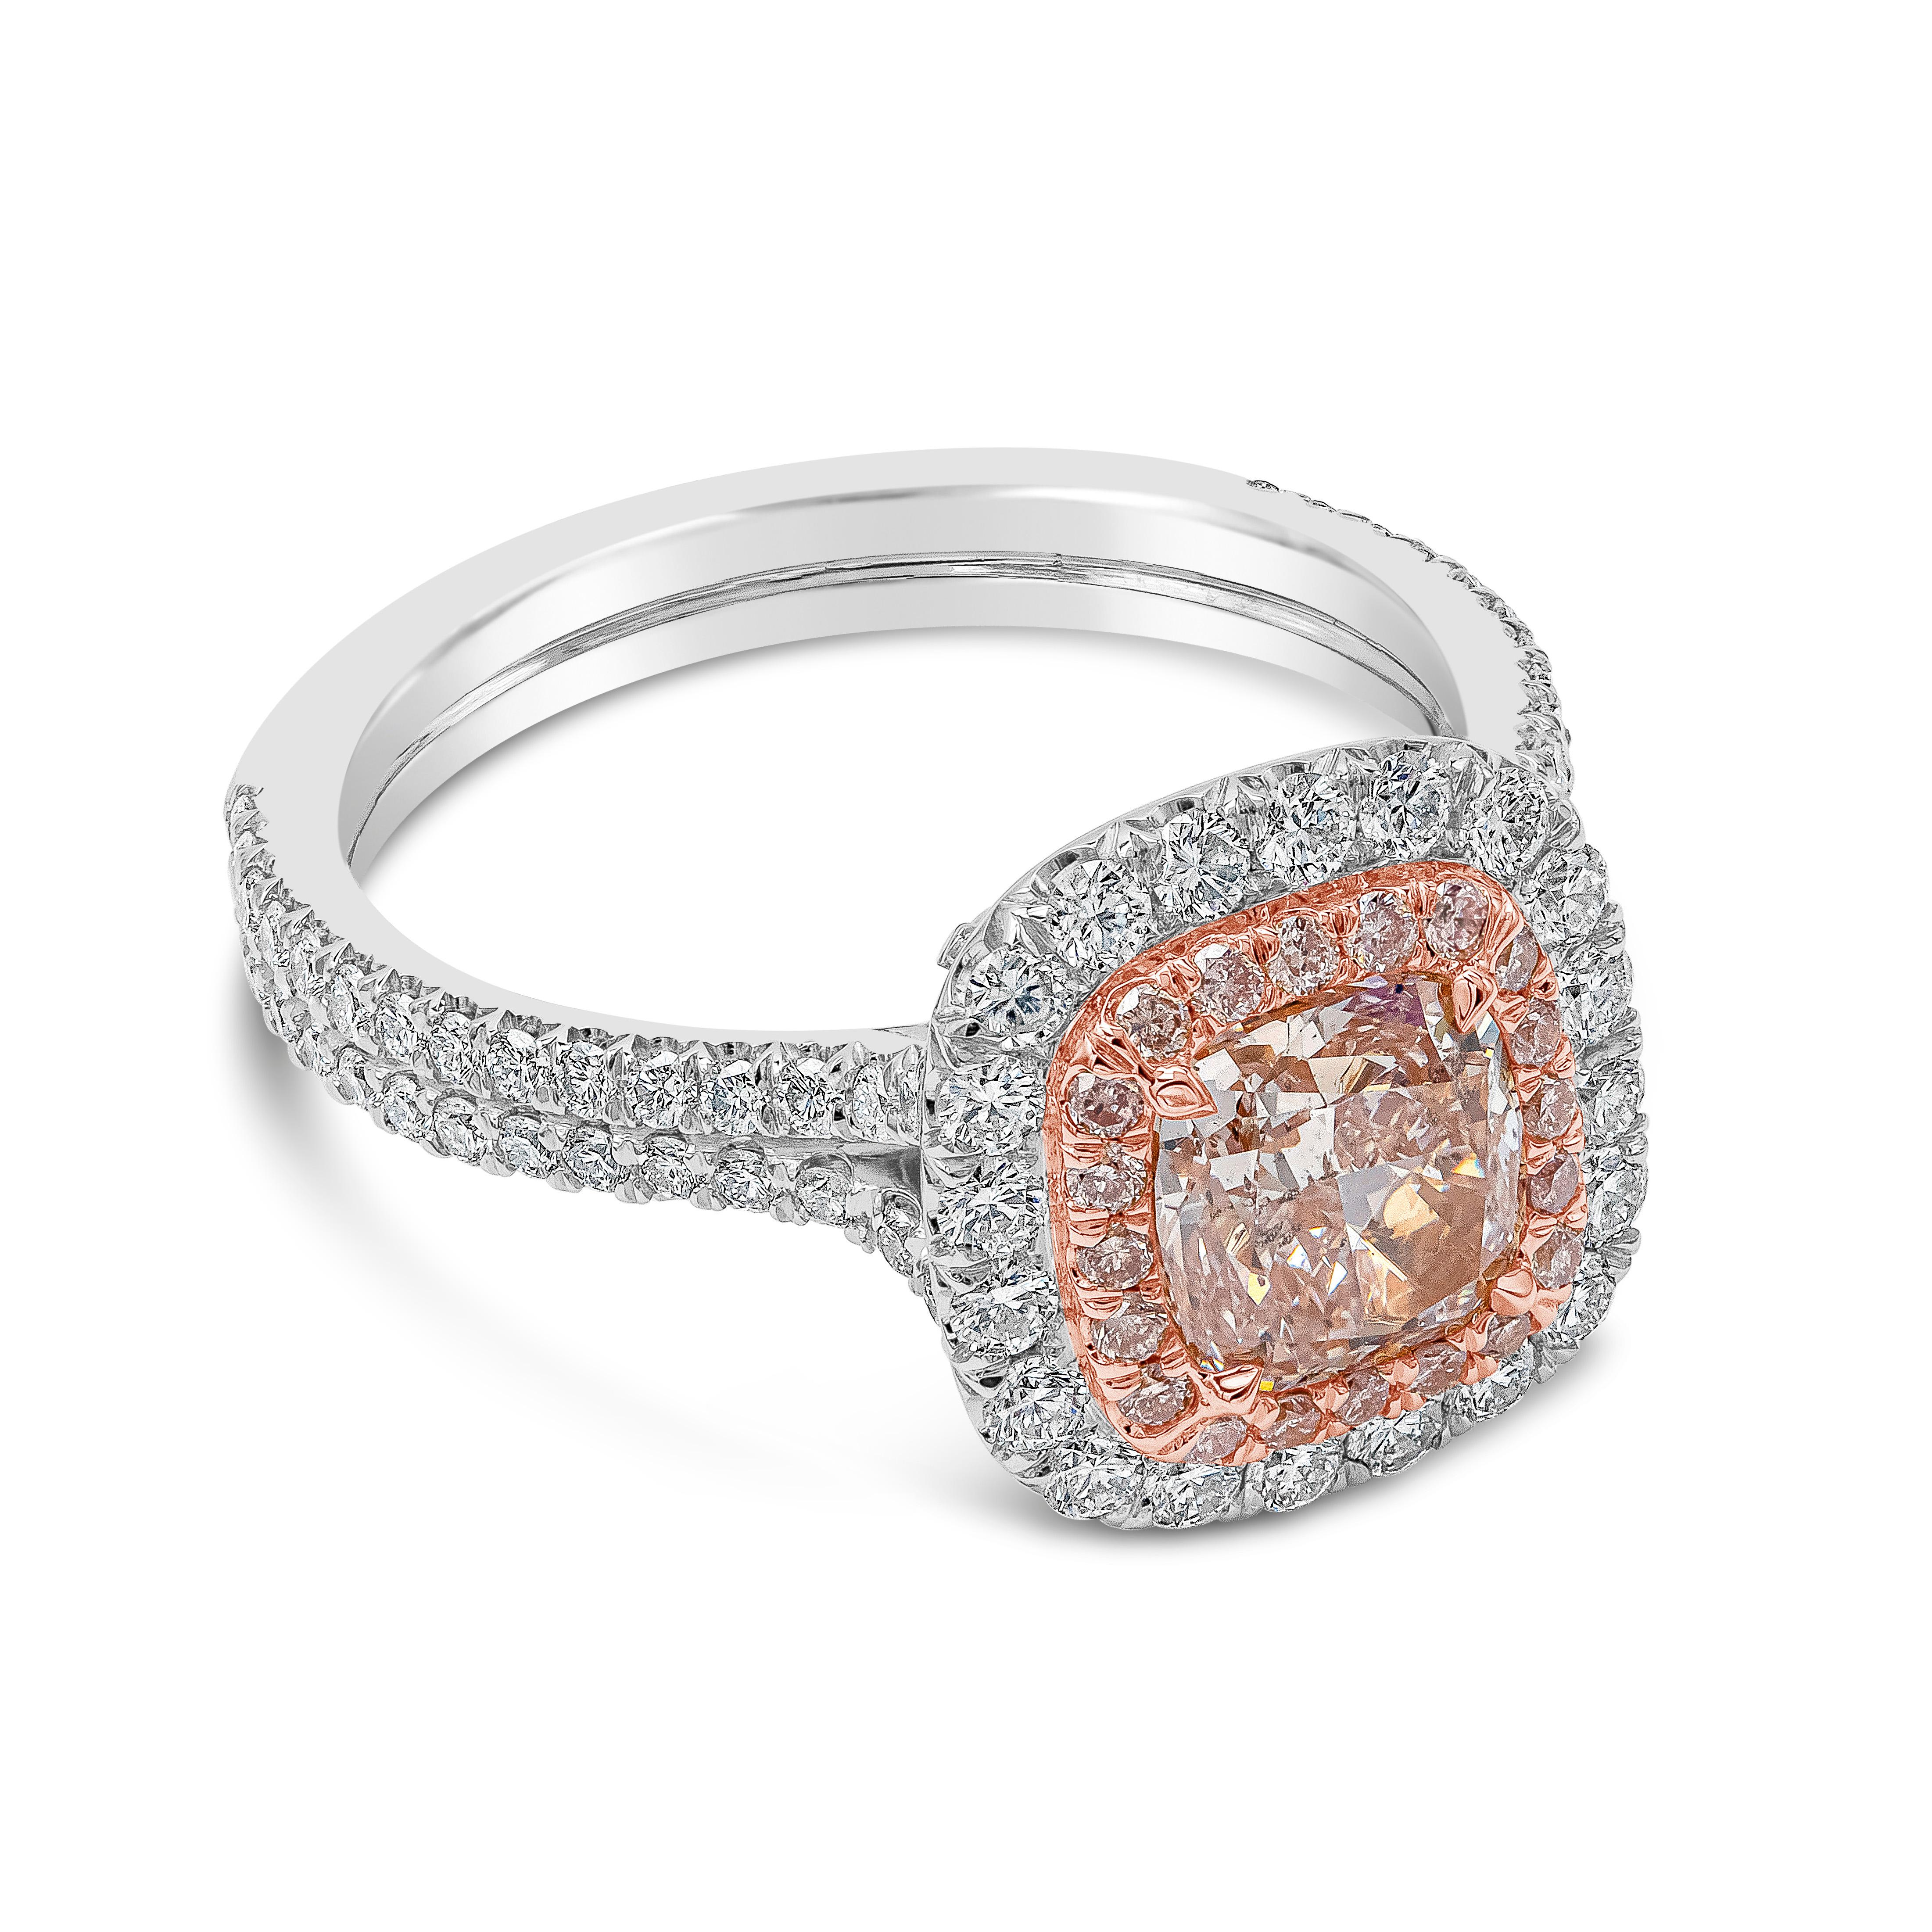 Elegantly made double halo engagement ring showcasing a vibrant 1.23 carat cushion cut diamond certified by GIA as fancy light pink, I1 in clarity, Set in a four prong 18k rose gold setting. Surrounded by a double halo design, inner halo consist of